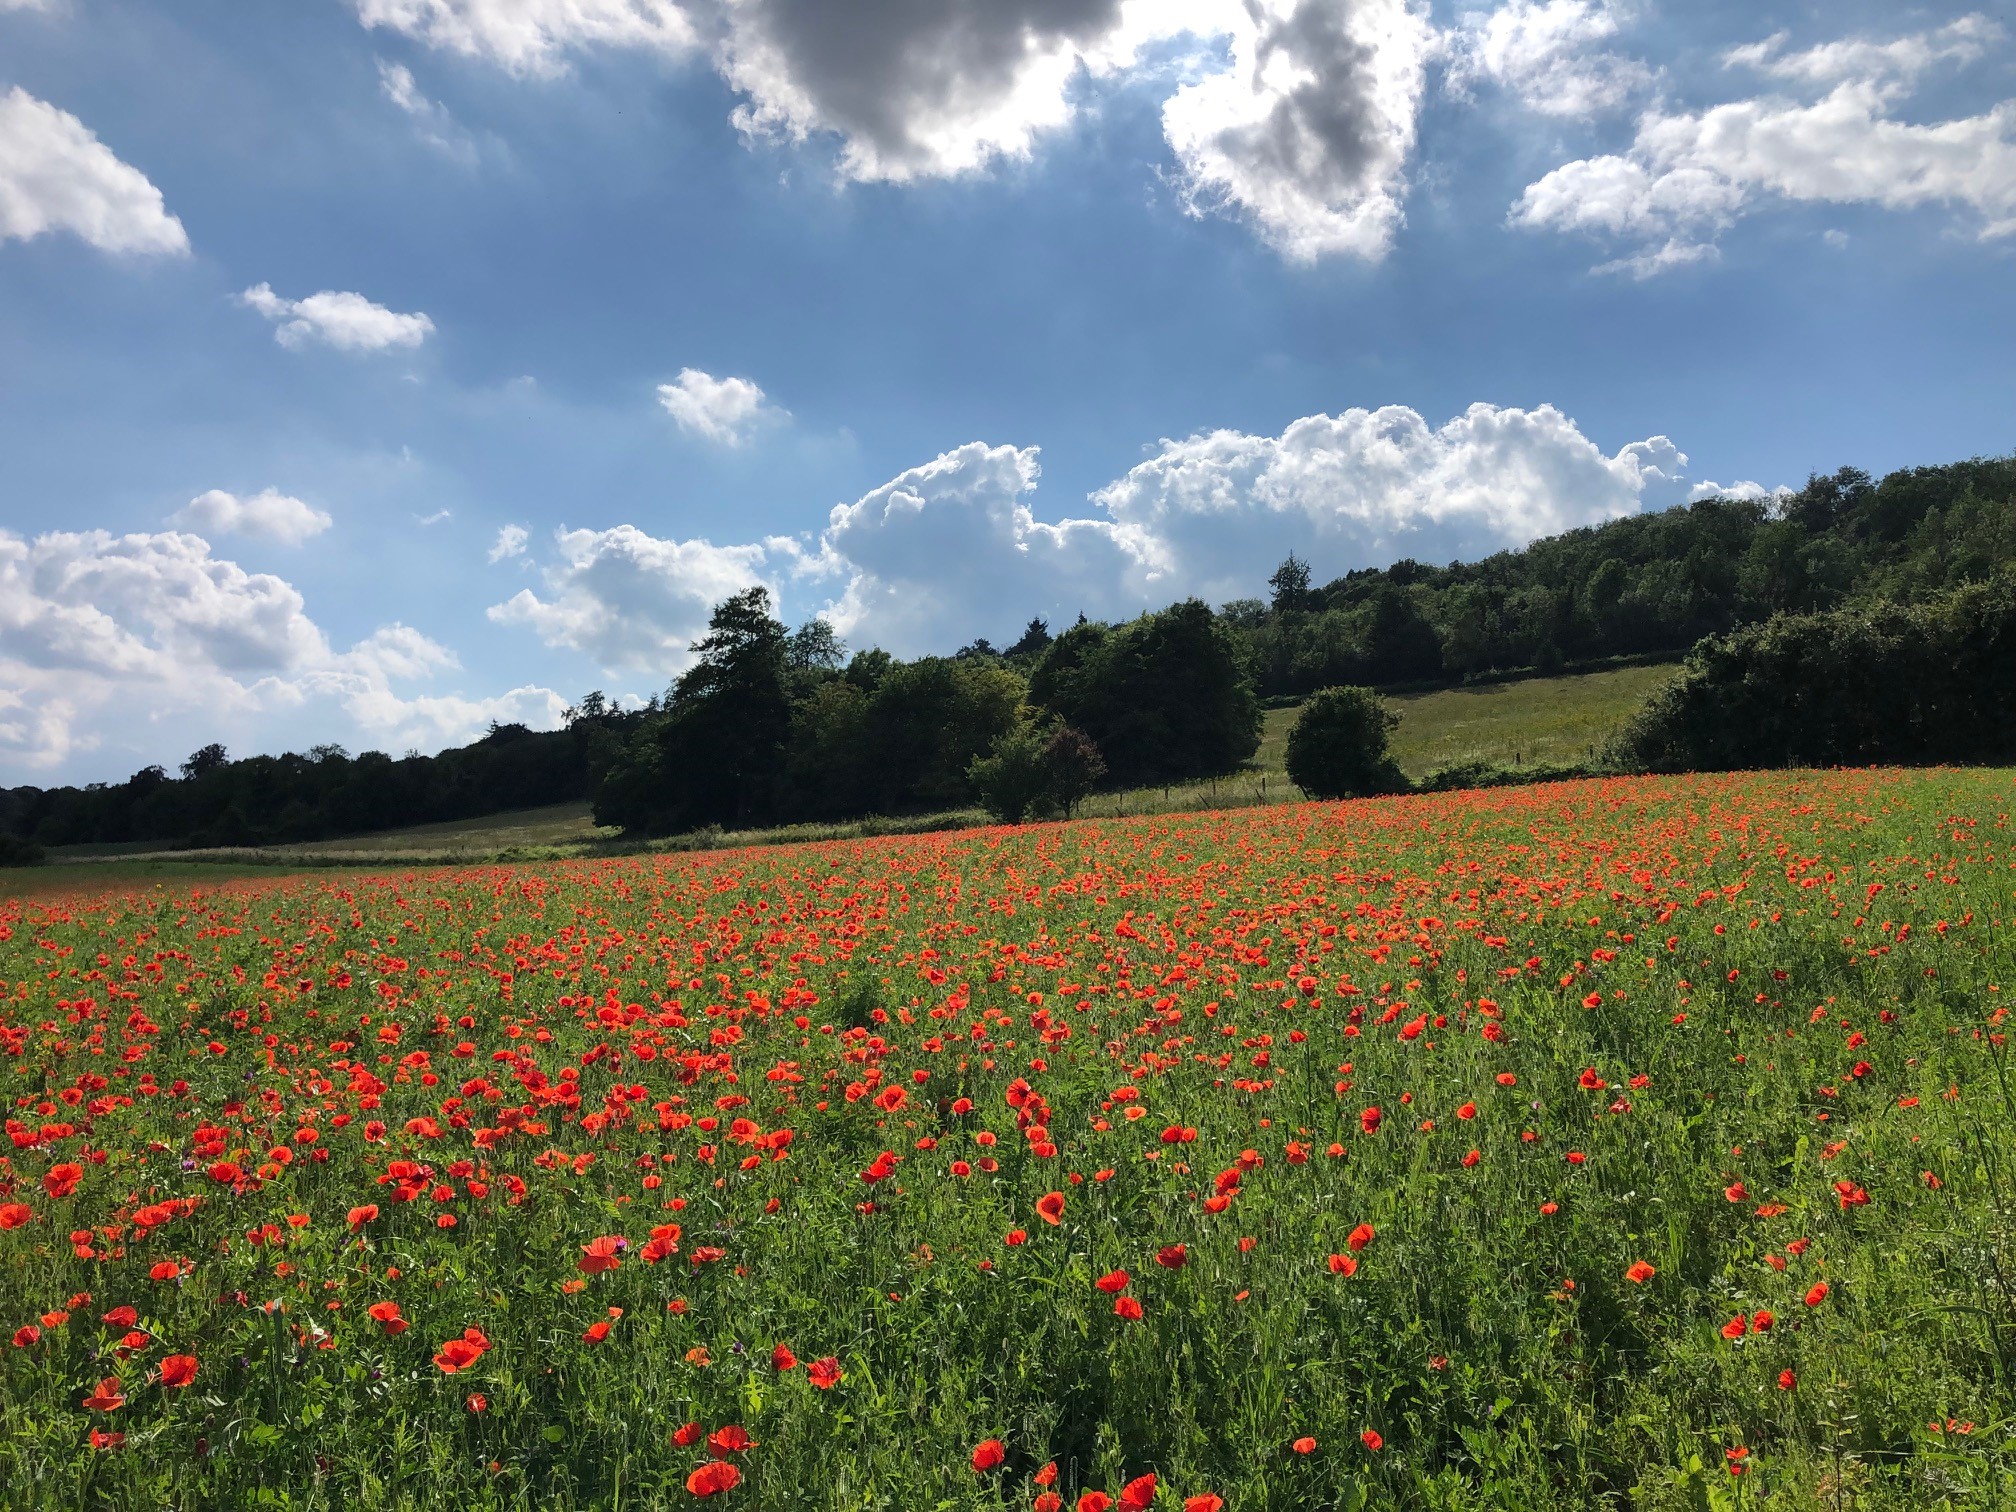 Poppies in field with blue sky above